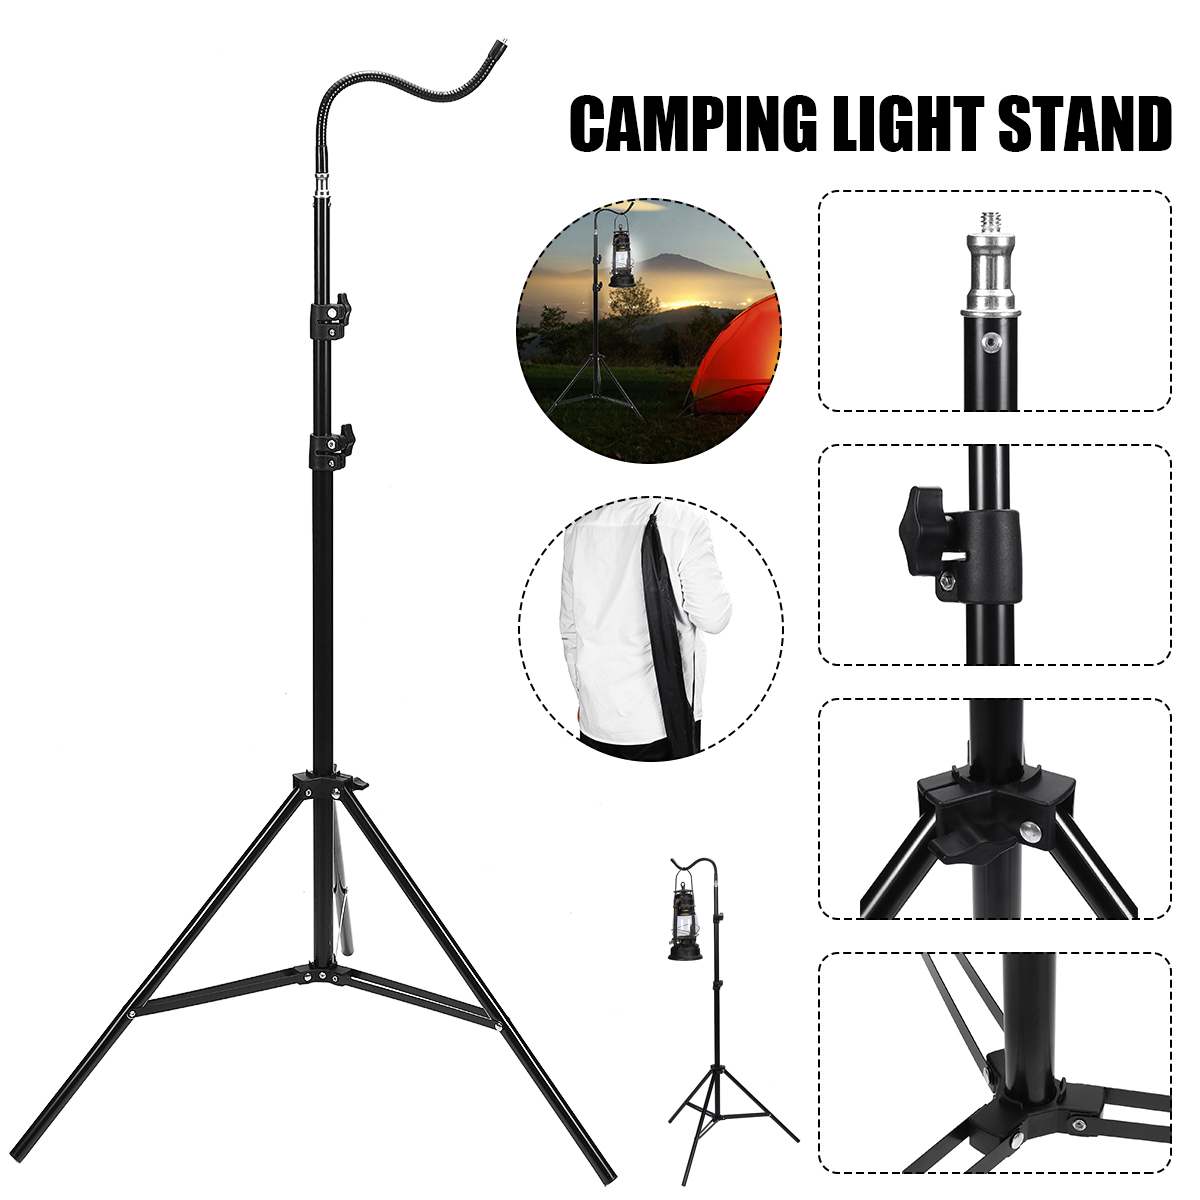 21m-Foldable-Lamp-Holder-Camping-Outdoor-Portable-Tent-Table-Hanger-Hook-Light-Fix-Stand-Camping-Lig-1935366-1